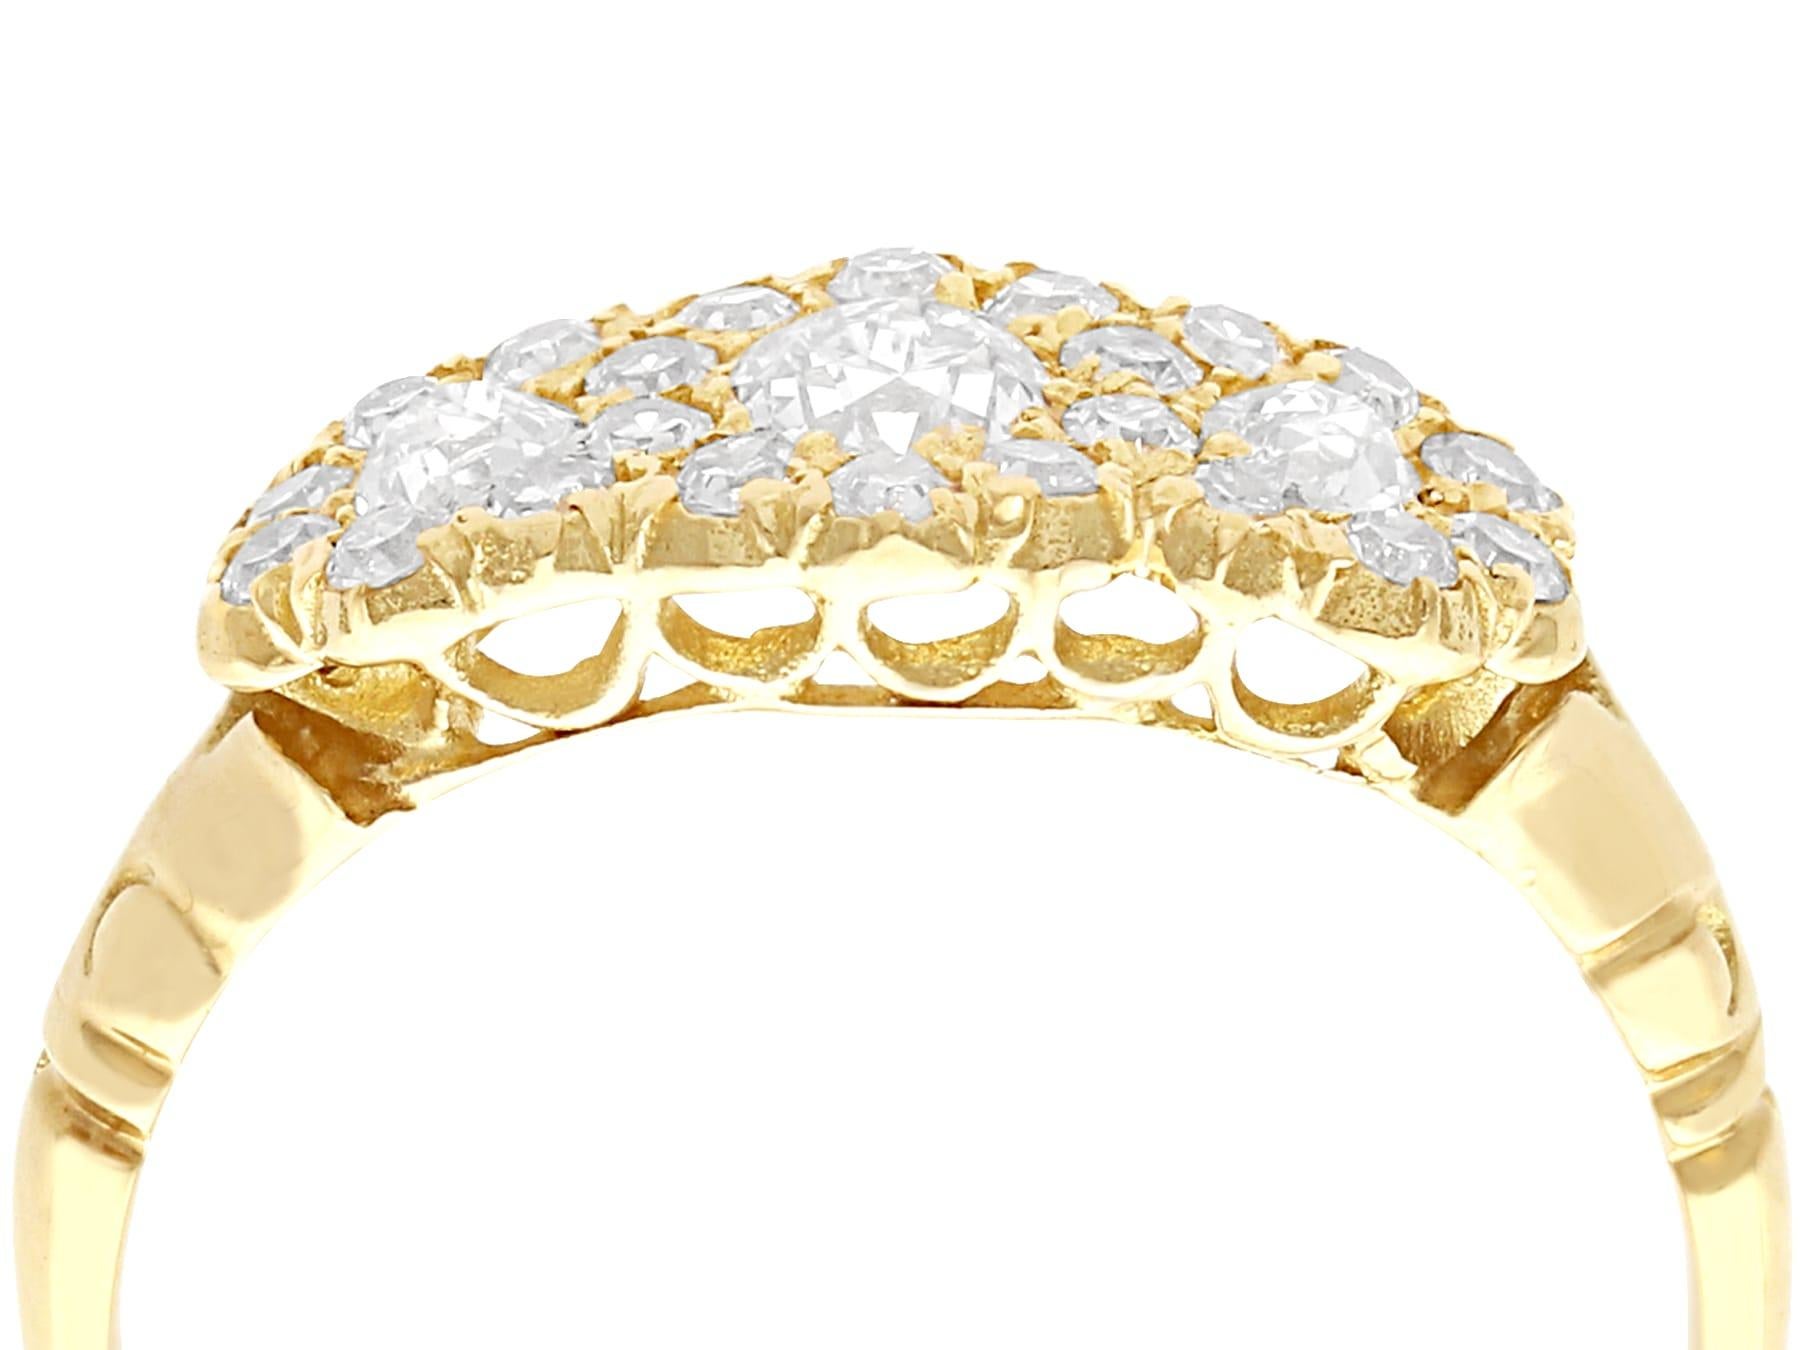 A fine and impressive antique 1.01 carat diamond and 18 karat yellow gold trilogy cluster ring; part of our diverse diamond cocktail ring collections.

This impressive antique diamond ring has been crafted in 18k yellow gold.

The pierced decorated